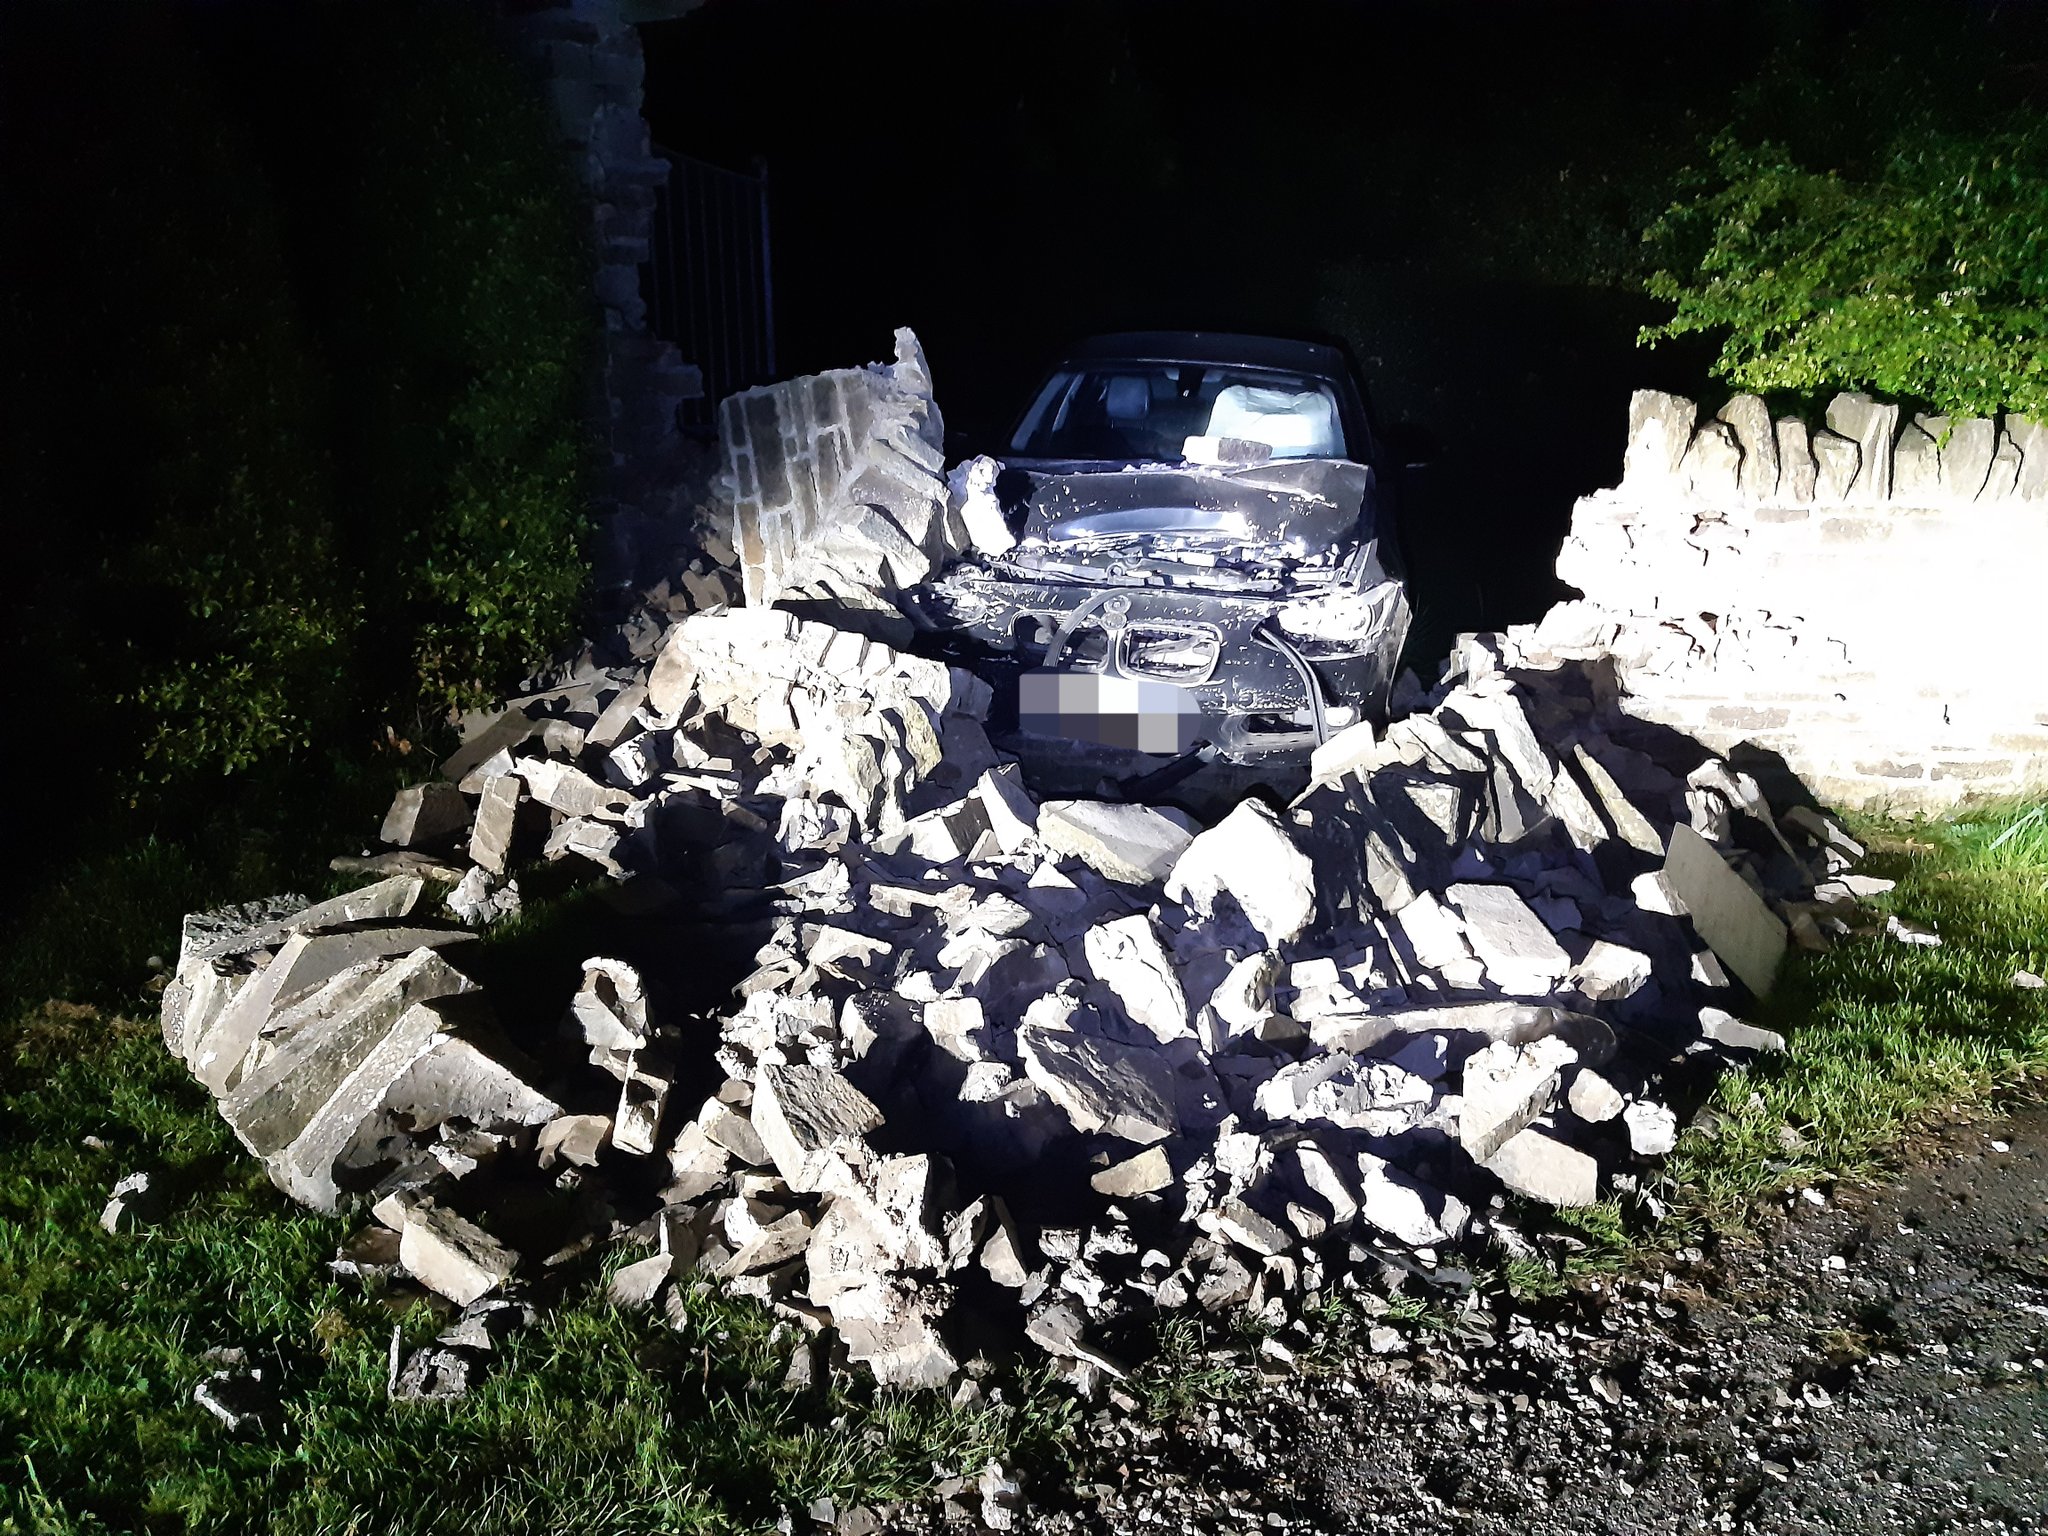 NEWS | Drink driver arrested after smashing through a wall in a Herefordshire village overnight